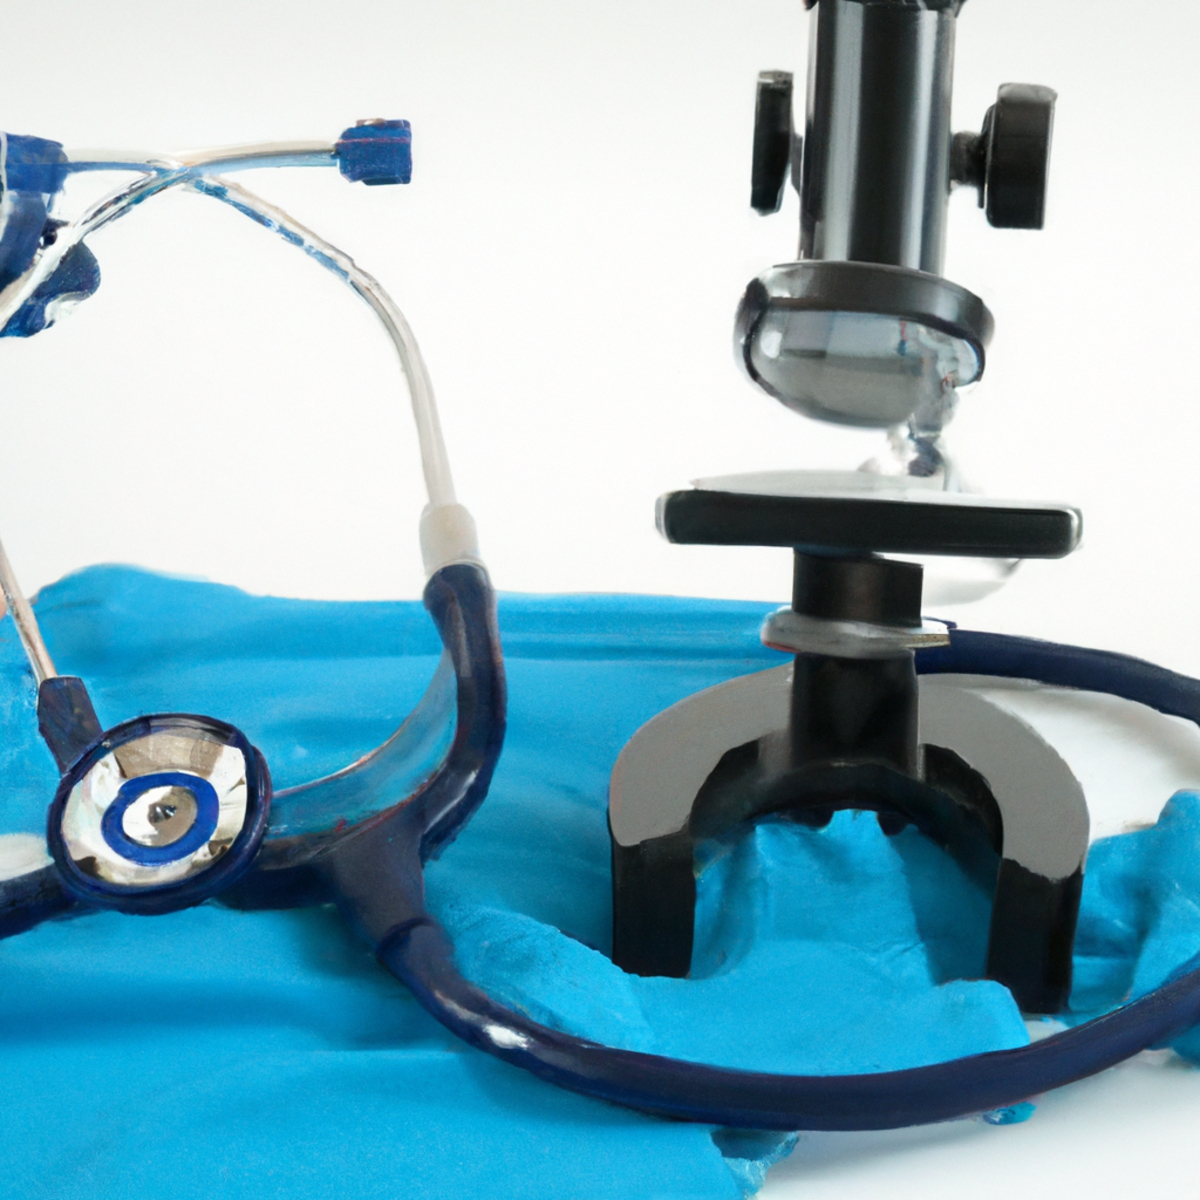 Medical tools and equipment symbolizing expertise in diagnosing and addressing Ataxia Telangiectasia.